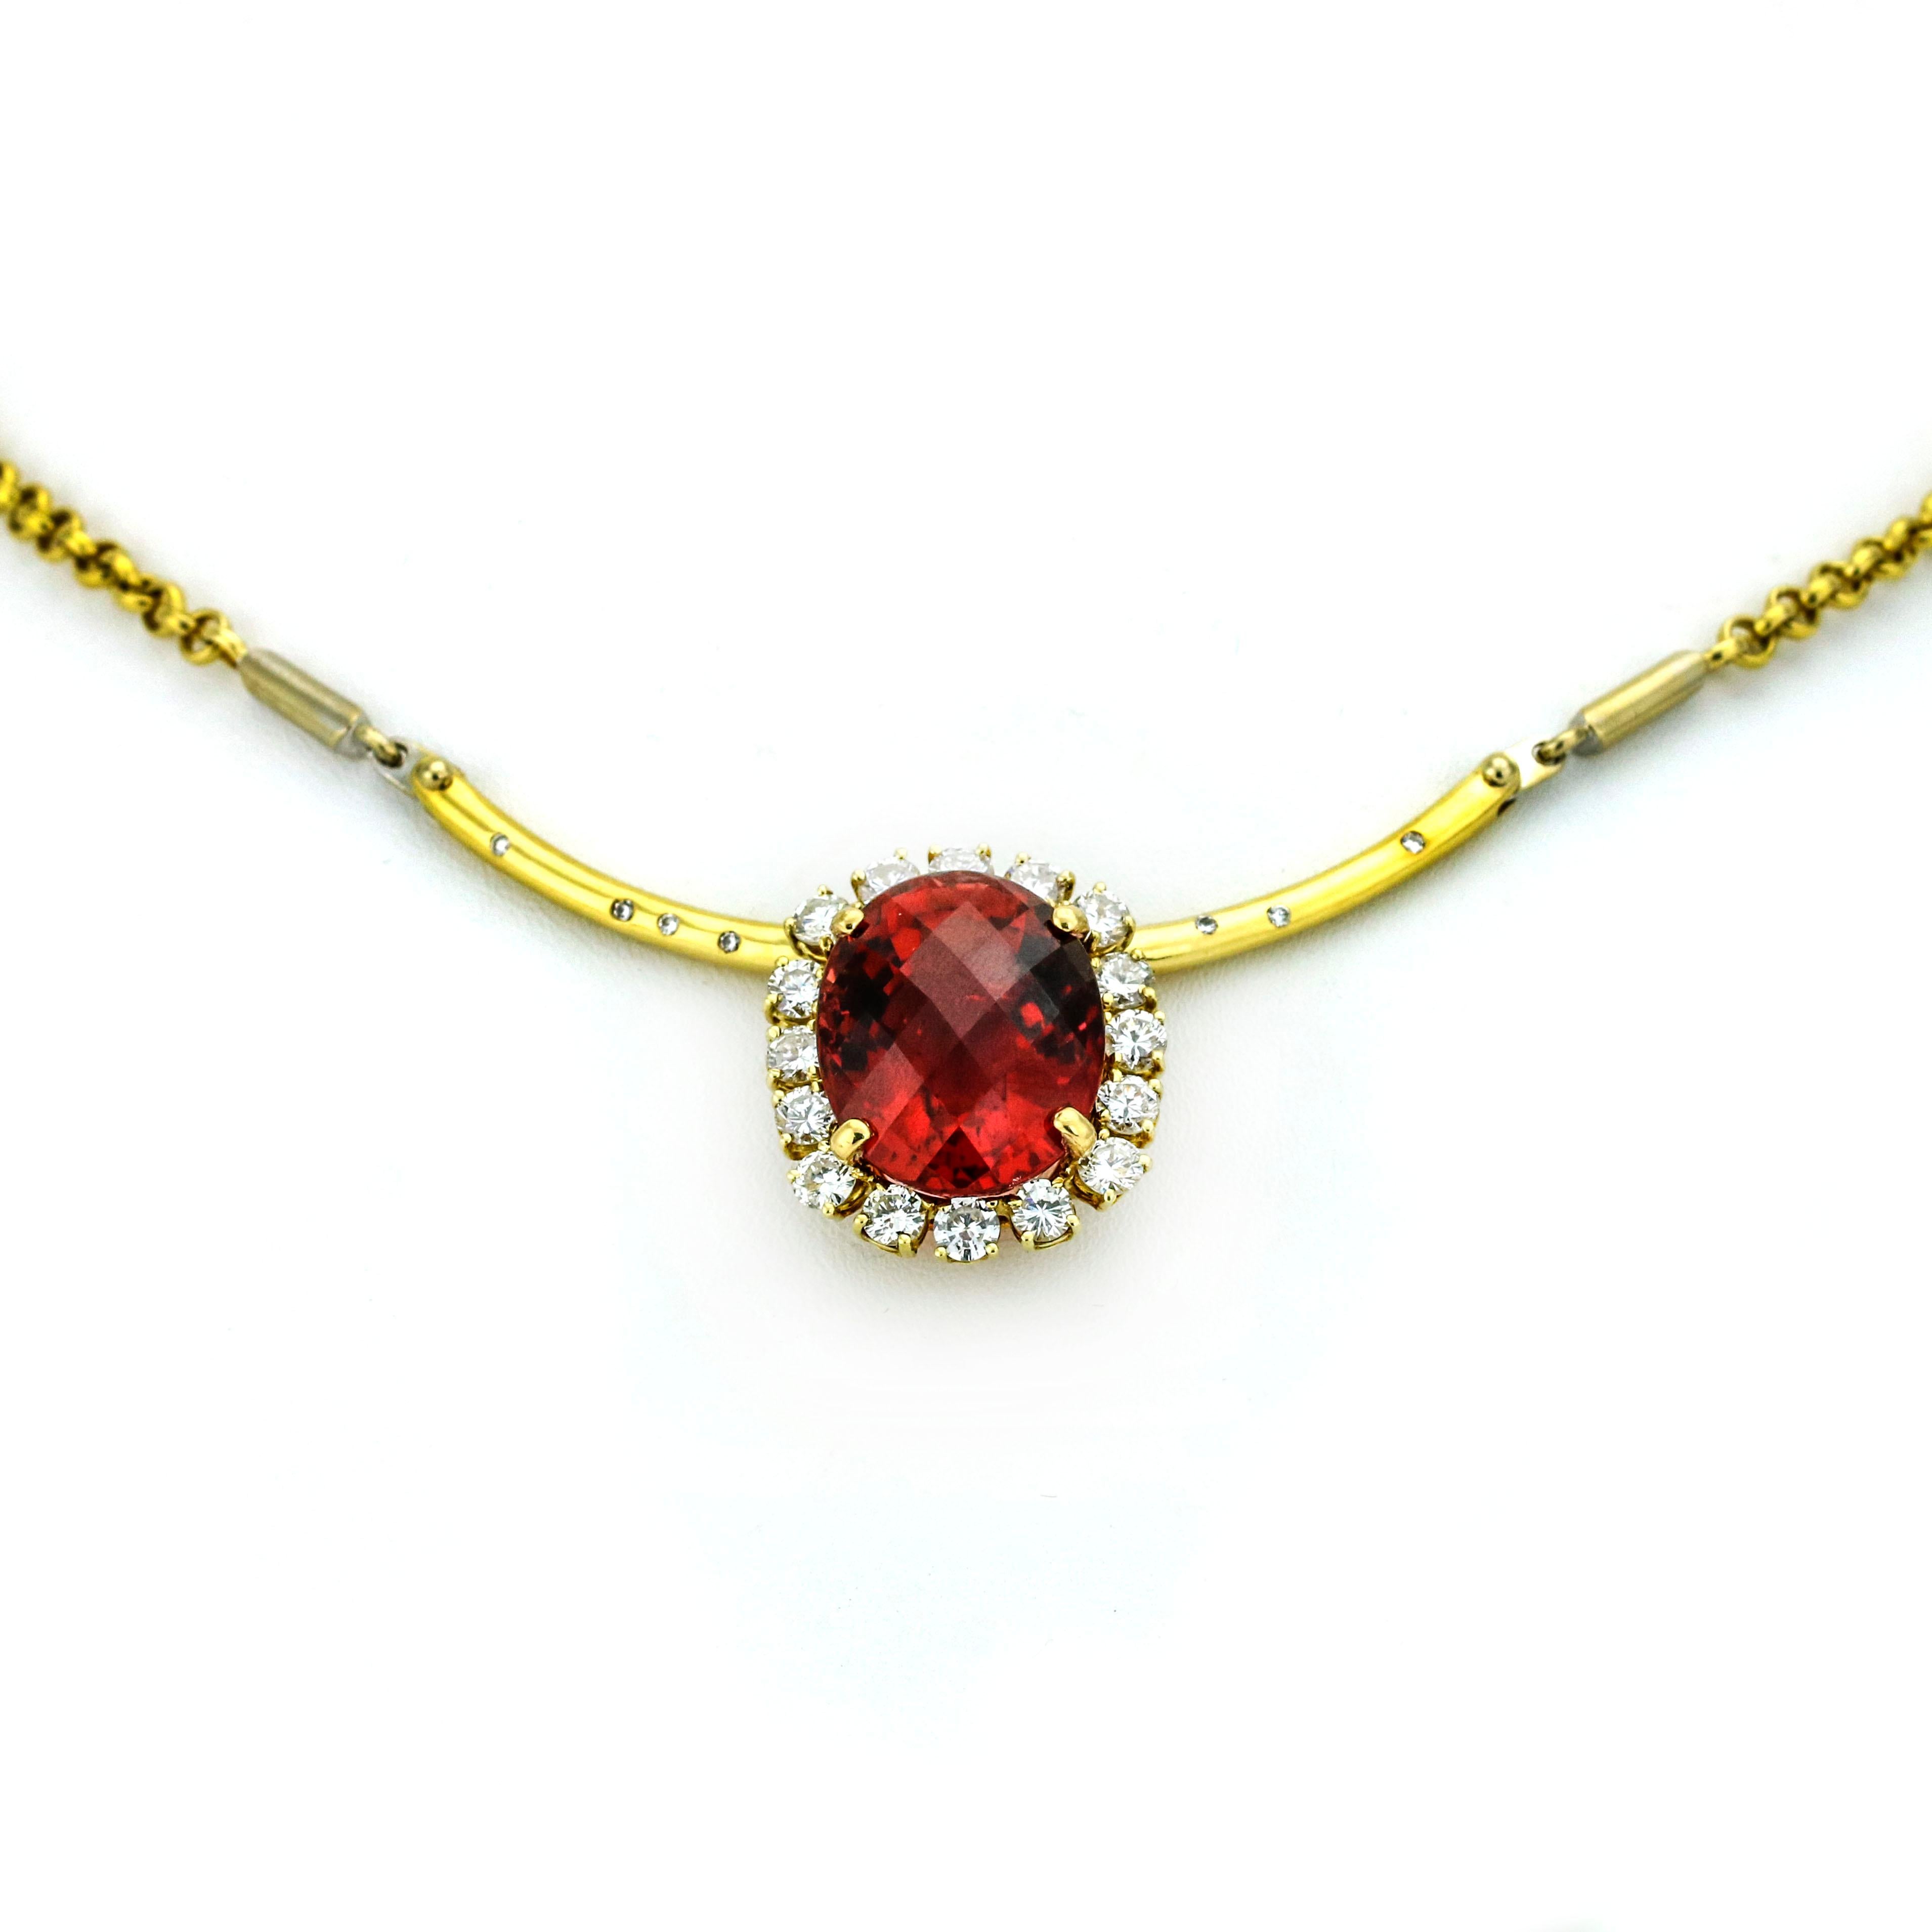 39.34 Carat 18 Karat Yellow Gold Rubellite Tourmaline Diamond Pendant Necklace In Excellent Condition For Sale In Fort Lauderdale, FL